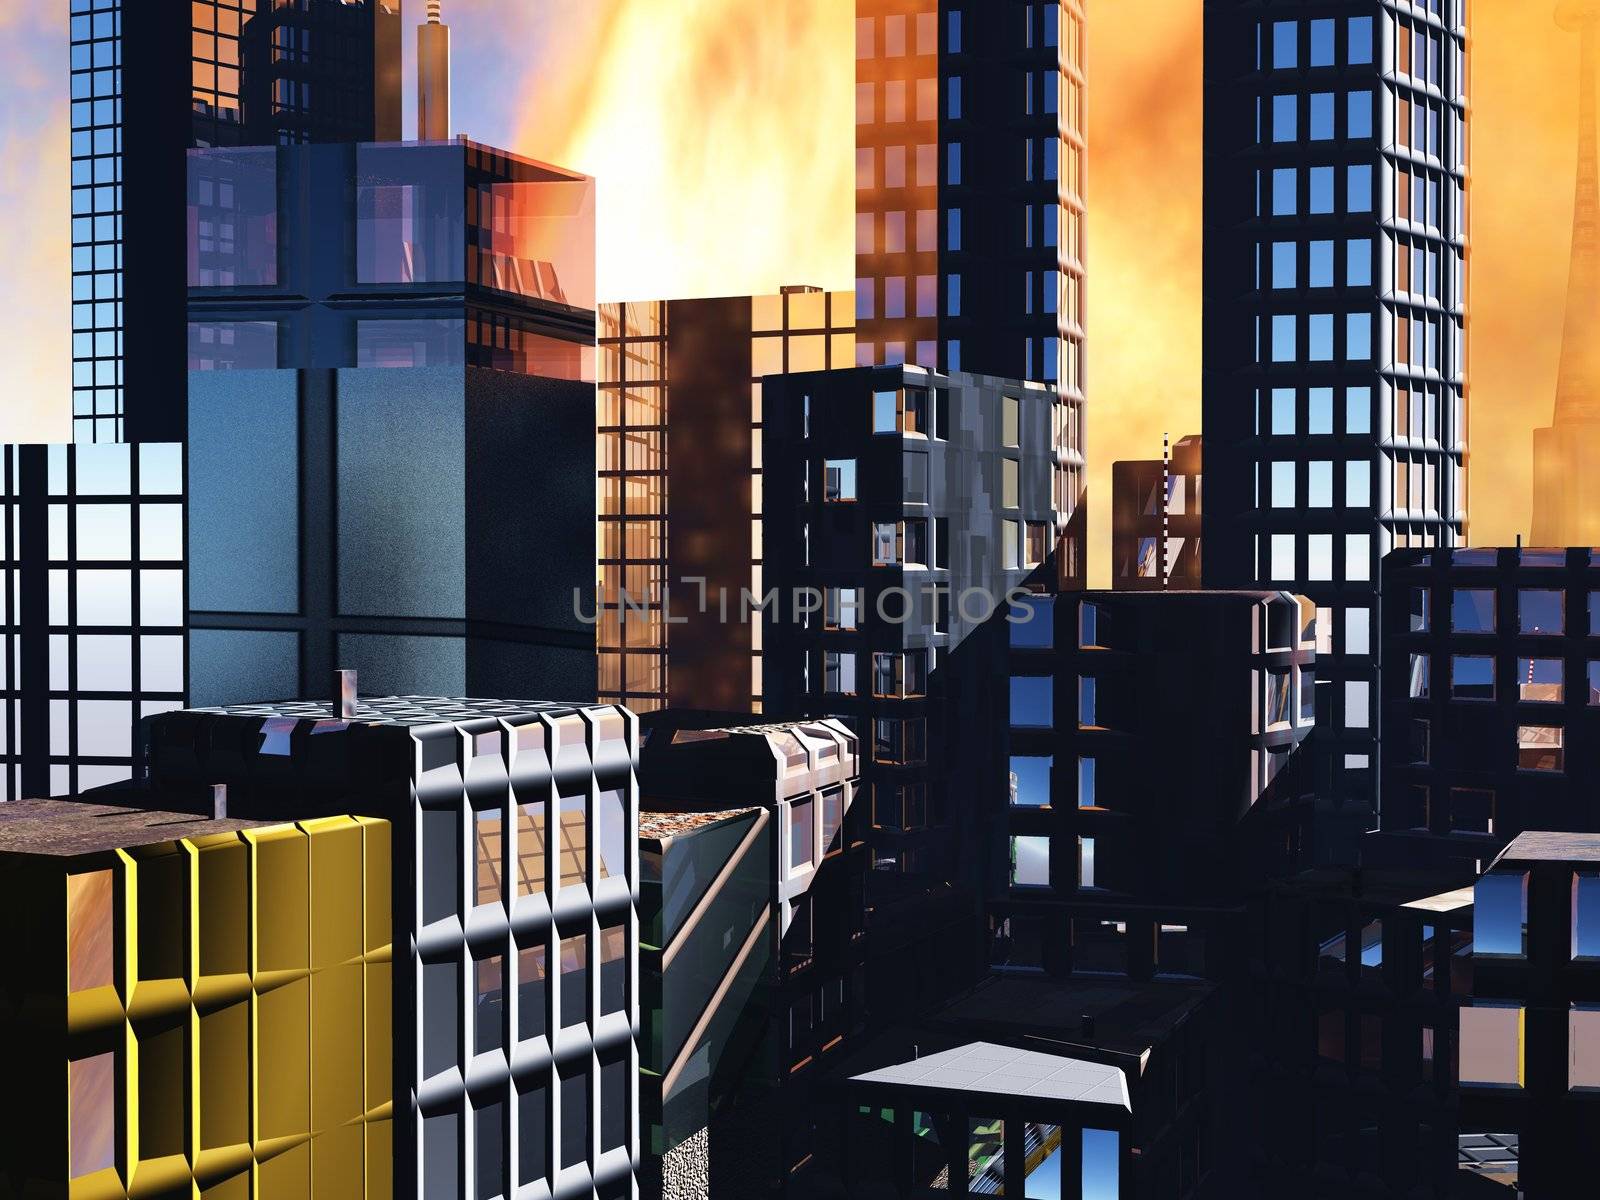 Armageddon scene in city after a war or a natural disaster